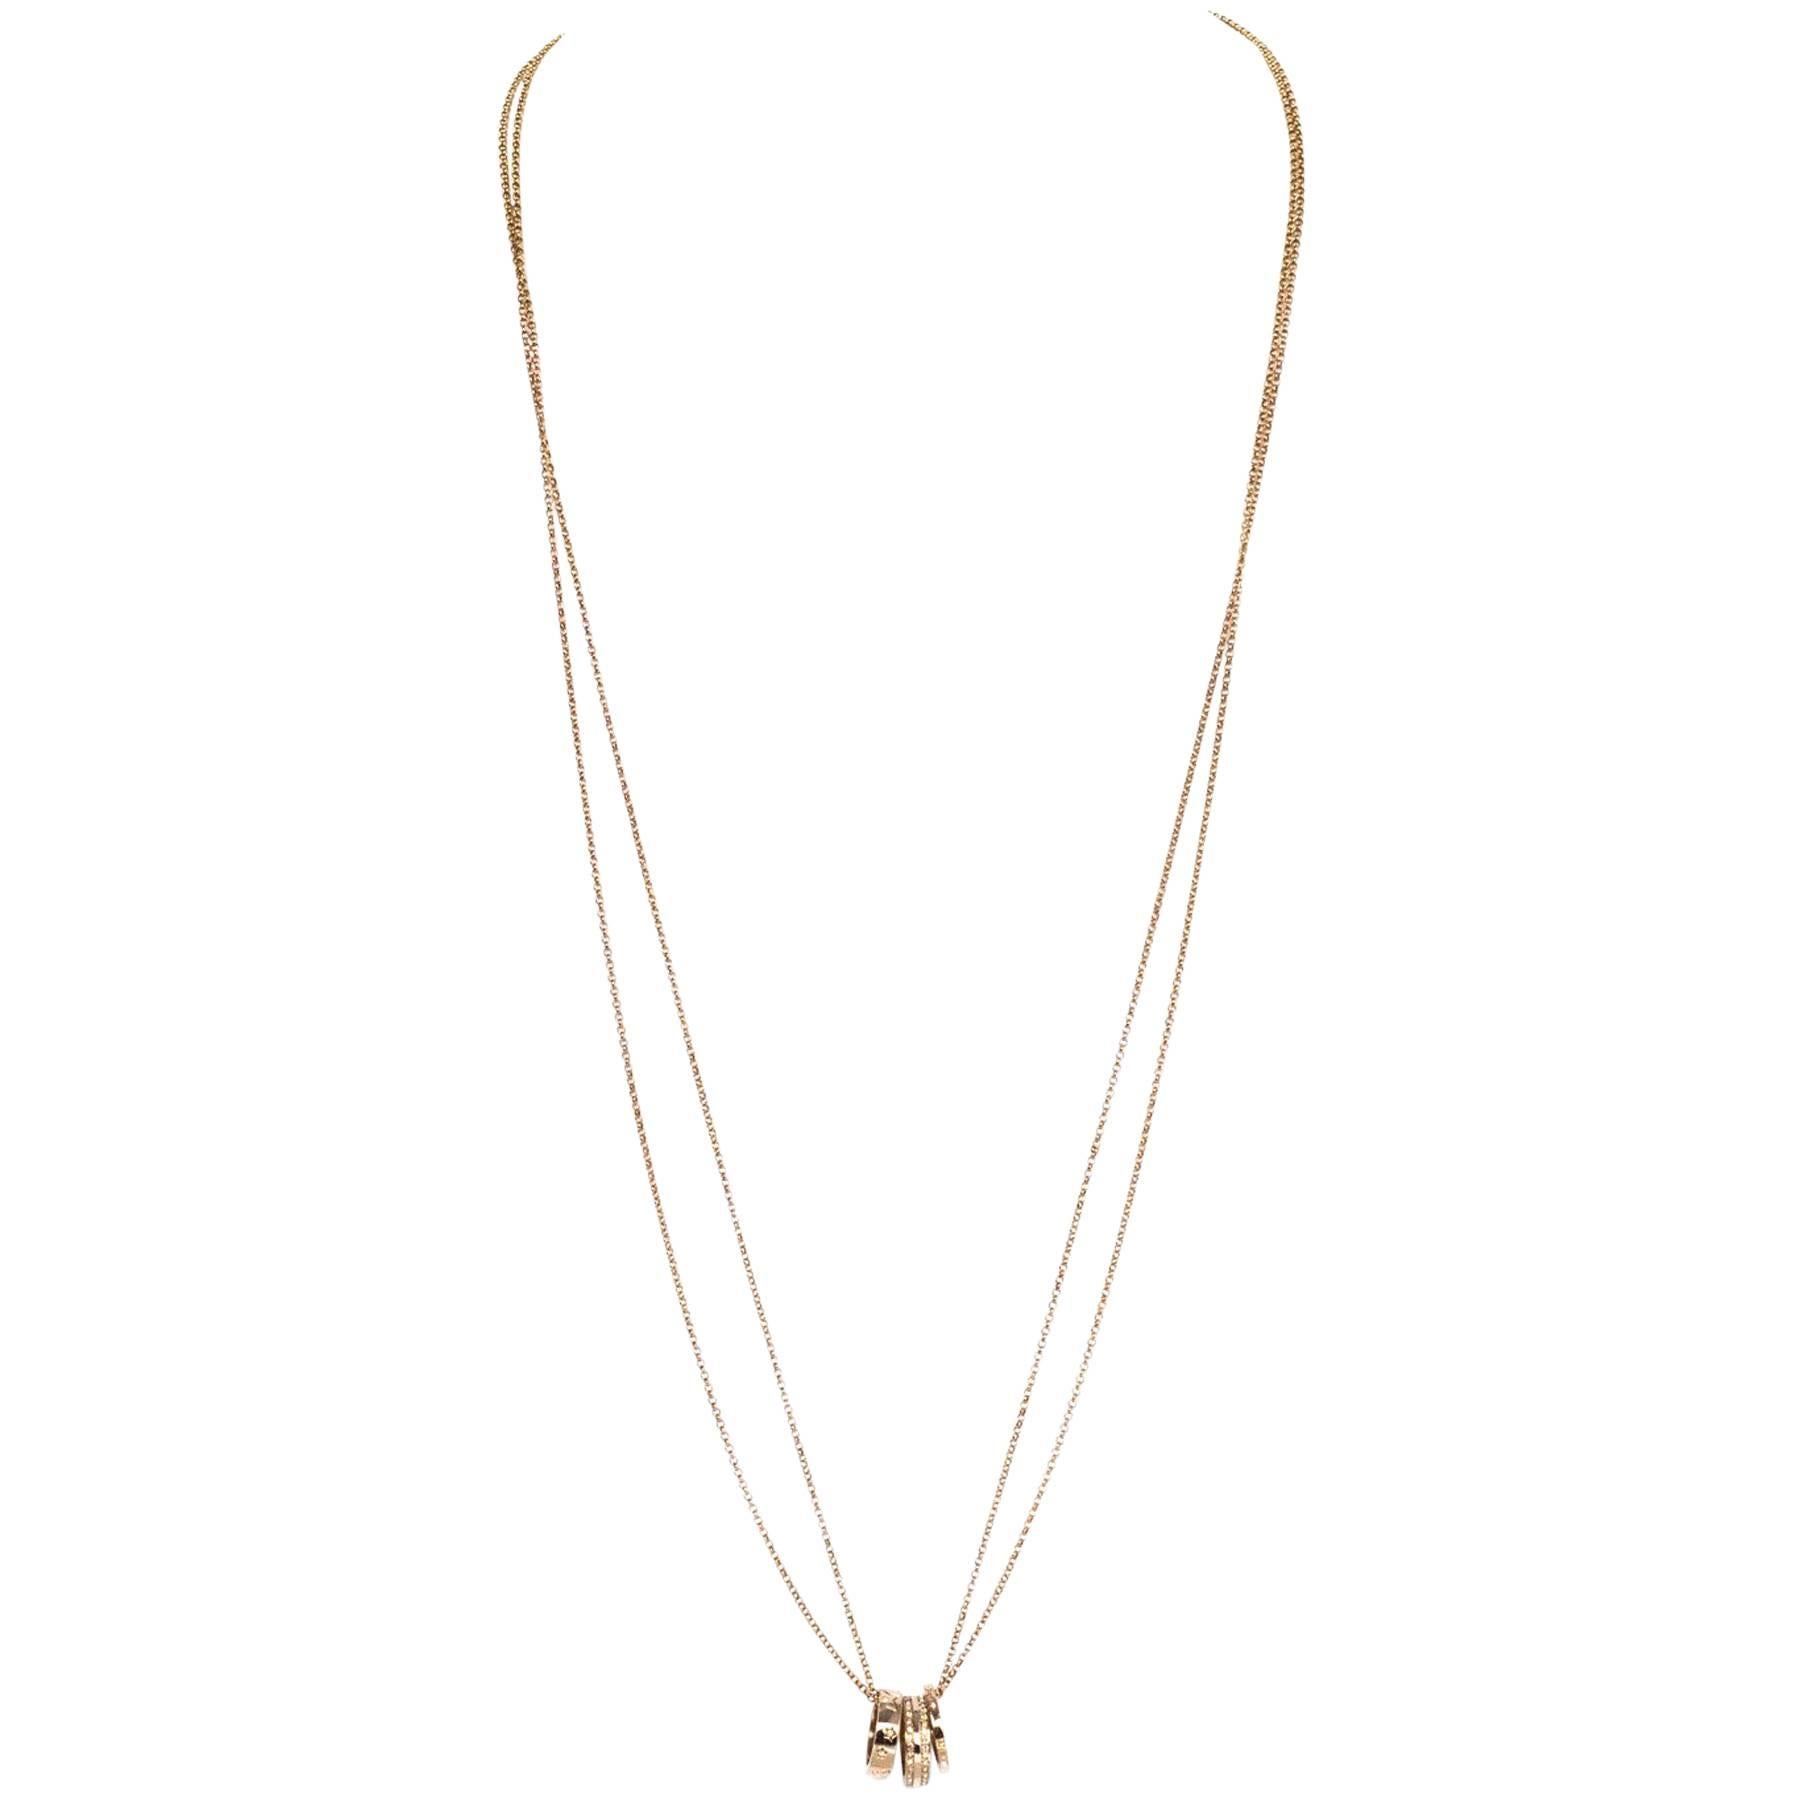 Christian Dior Gold Double Chain 3 Ring Necklace